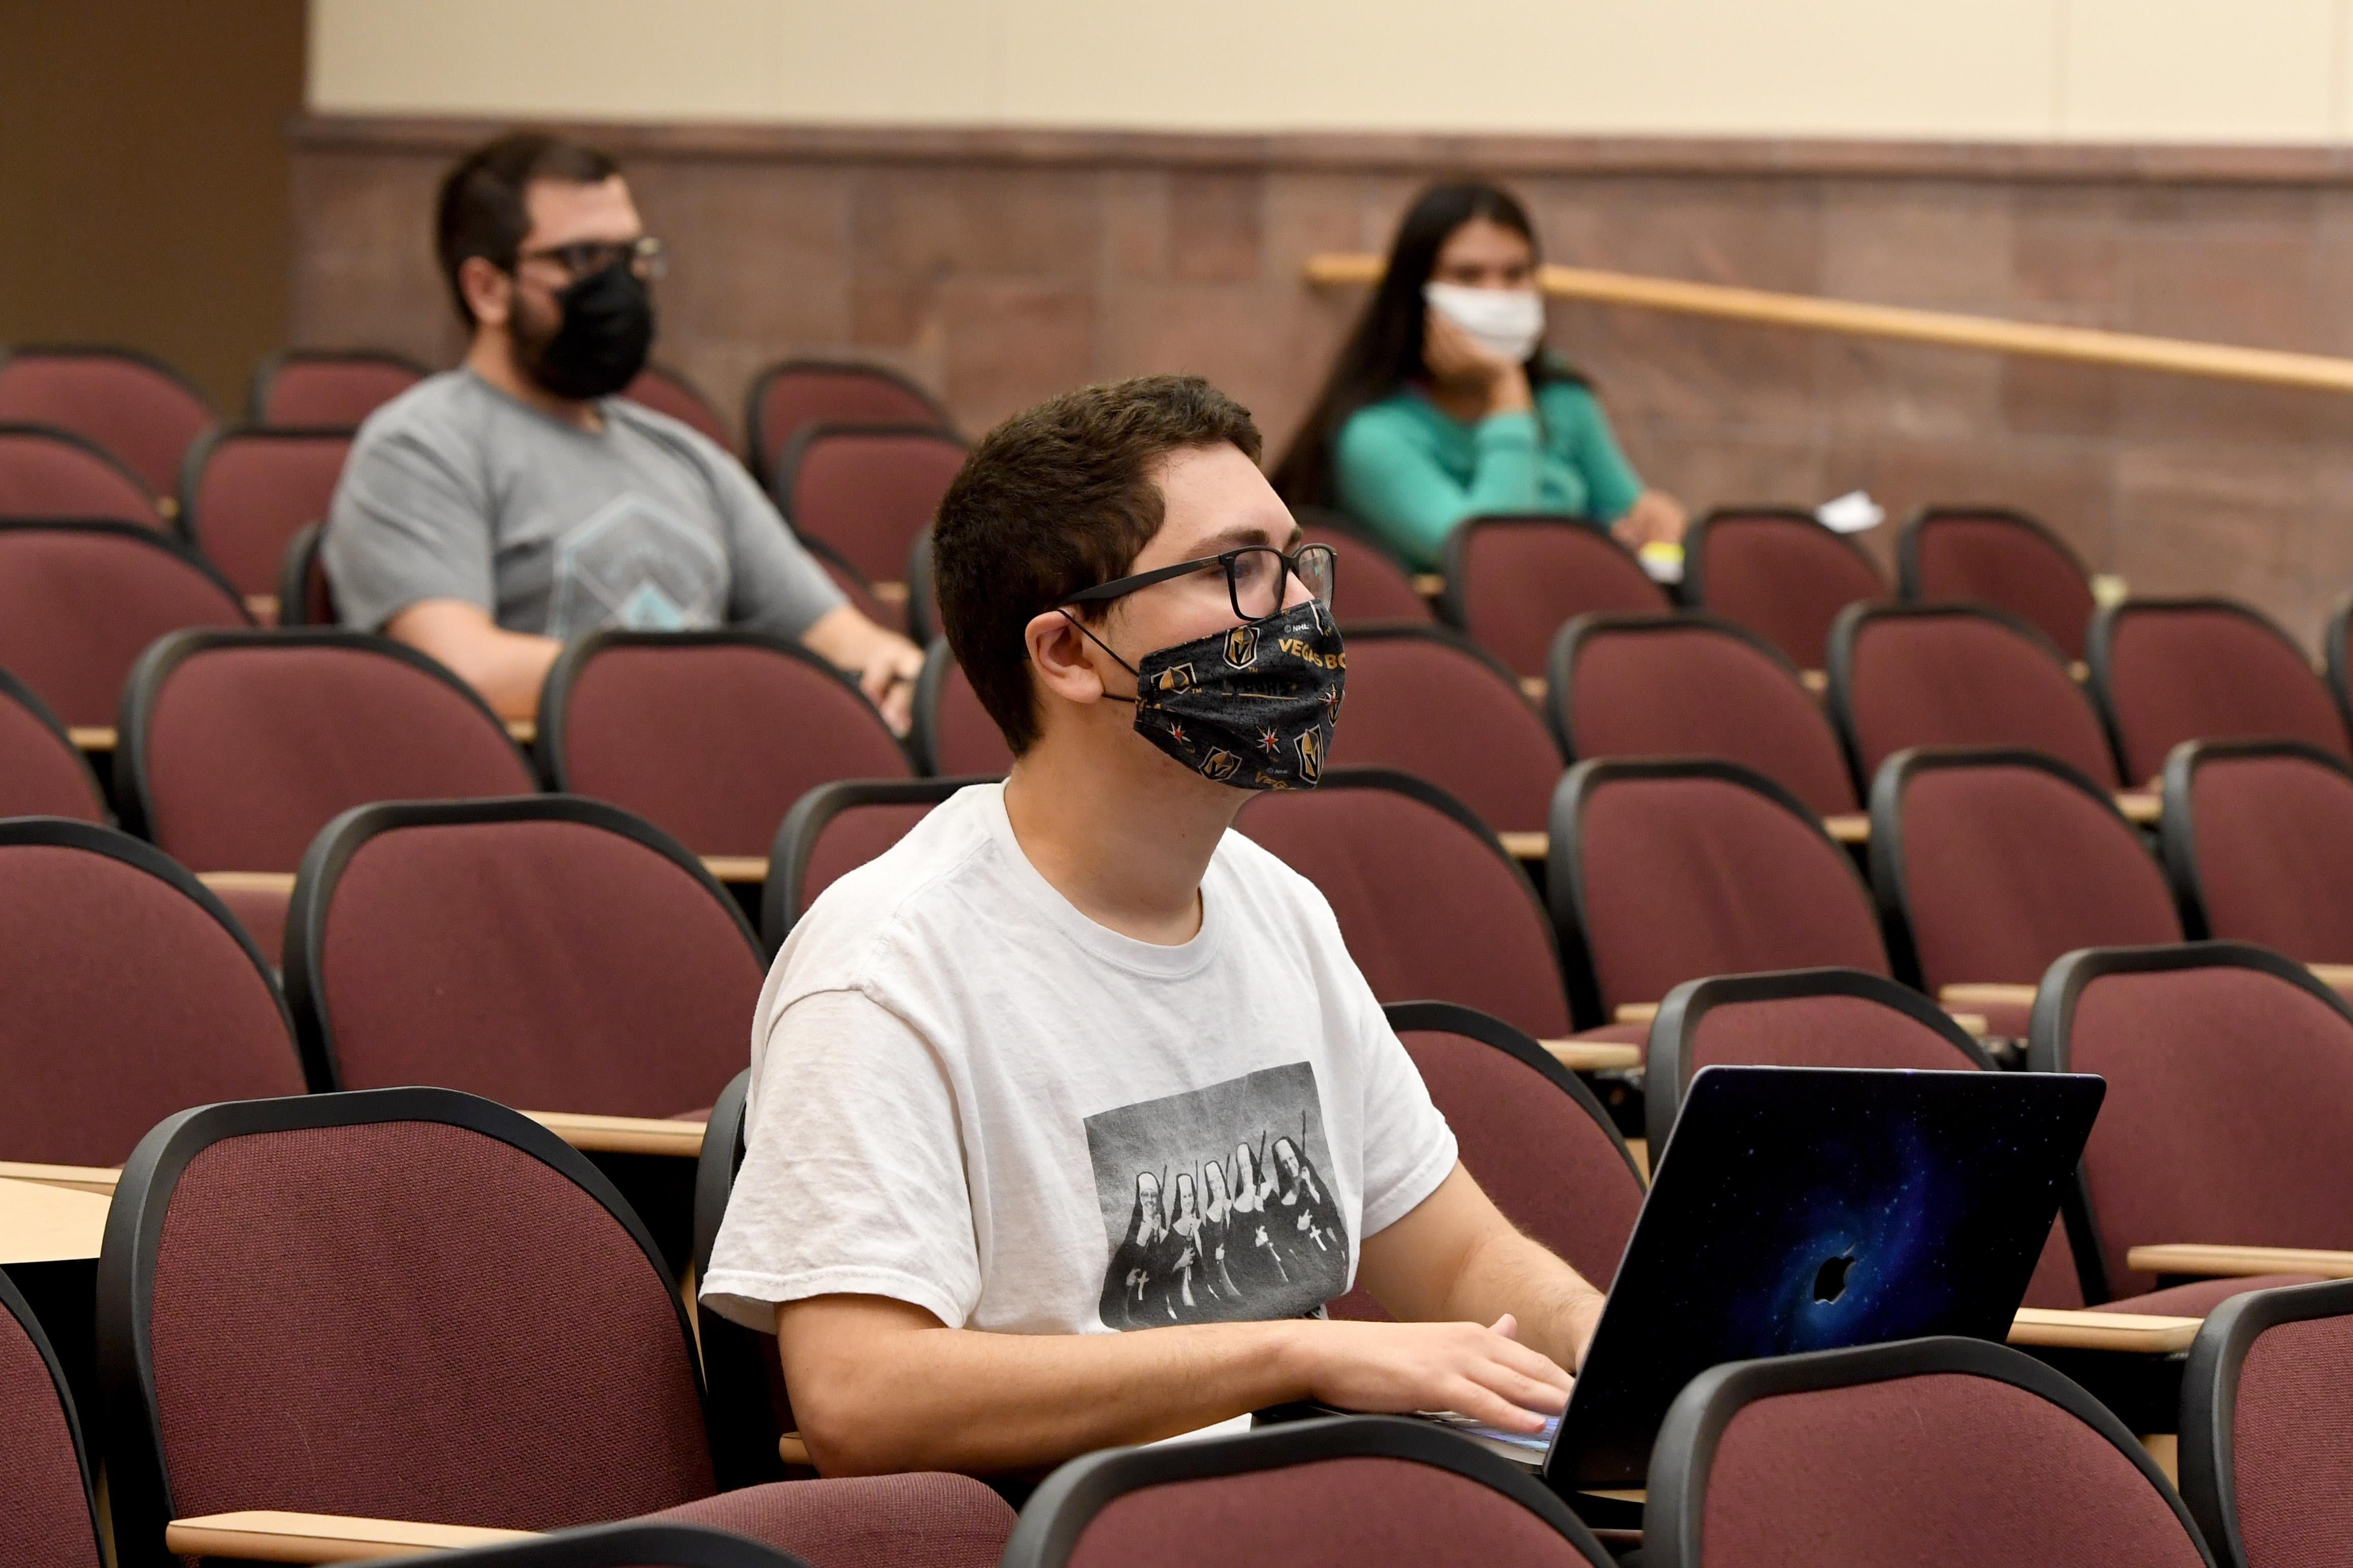 Students wearing masks socially distance in a lecture hall